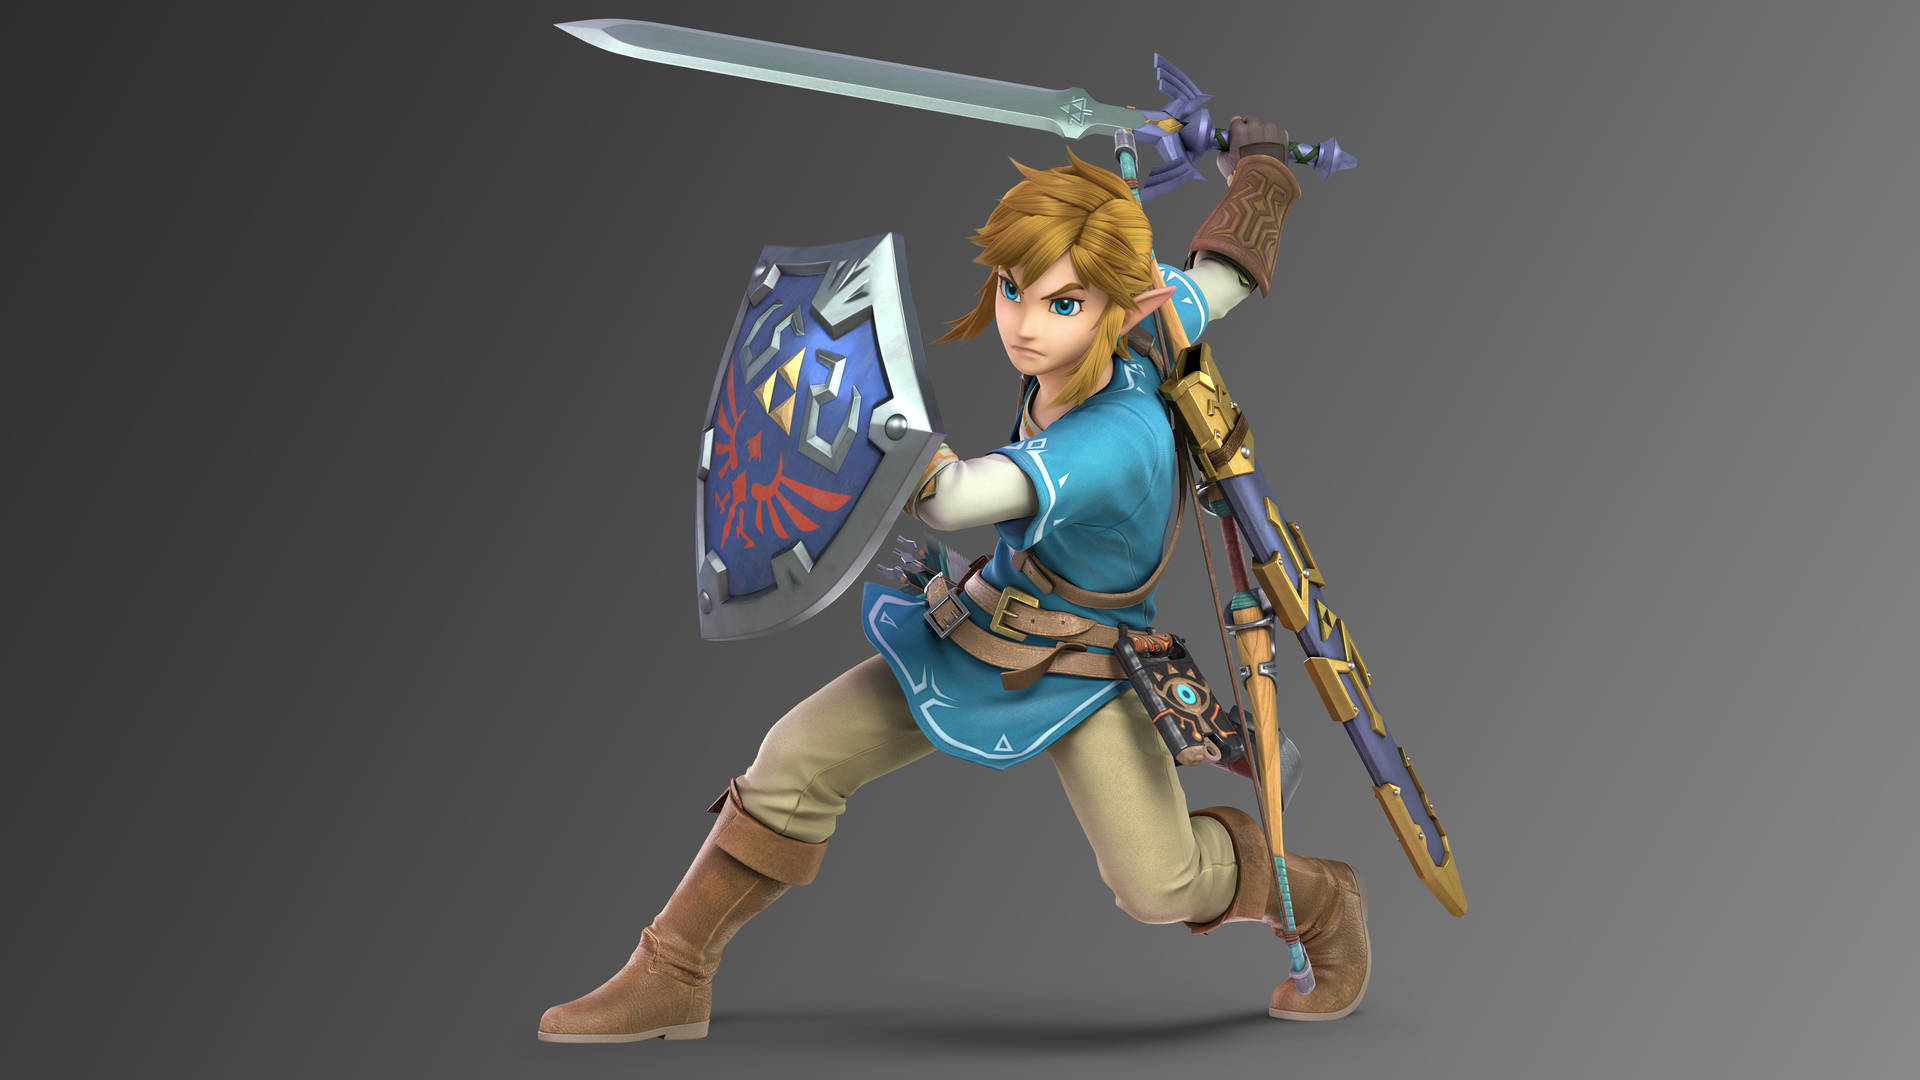 Nintendo's Super Smash Bros Ultimate character, Link, in all his glory! Wallpaper